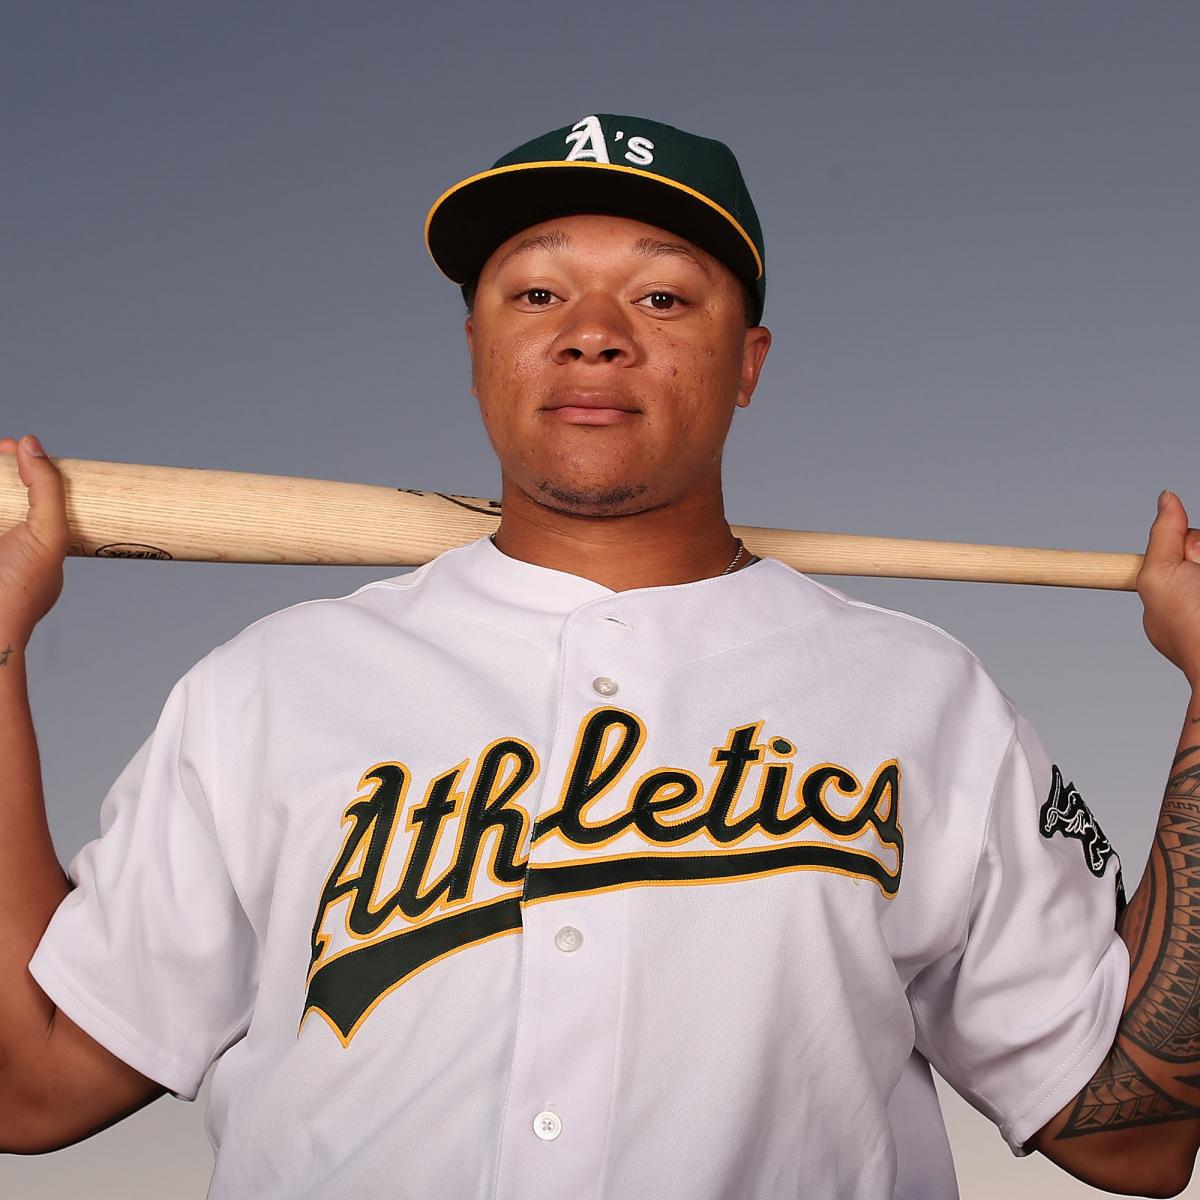 Top Prospects That Can Get the Oakland A's over the Hump Next Season